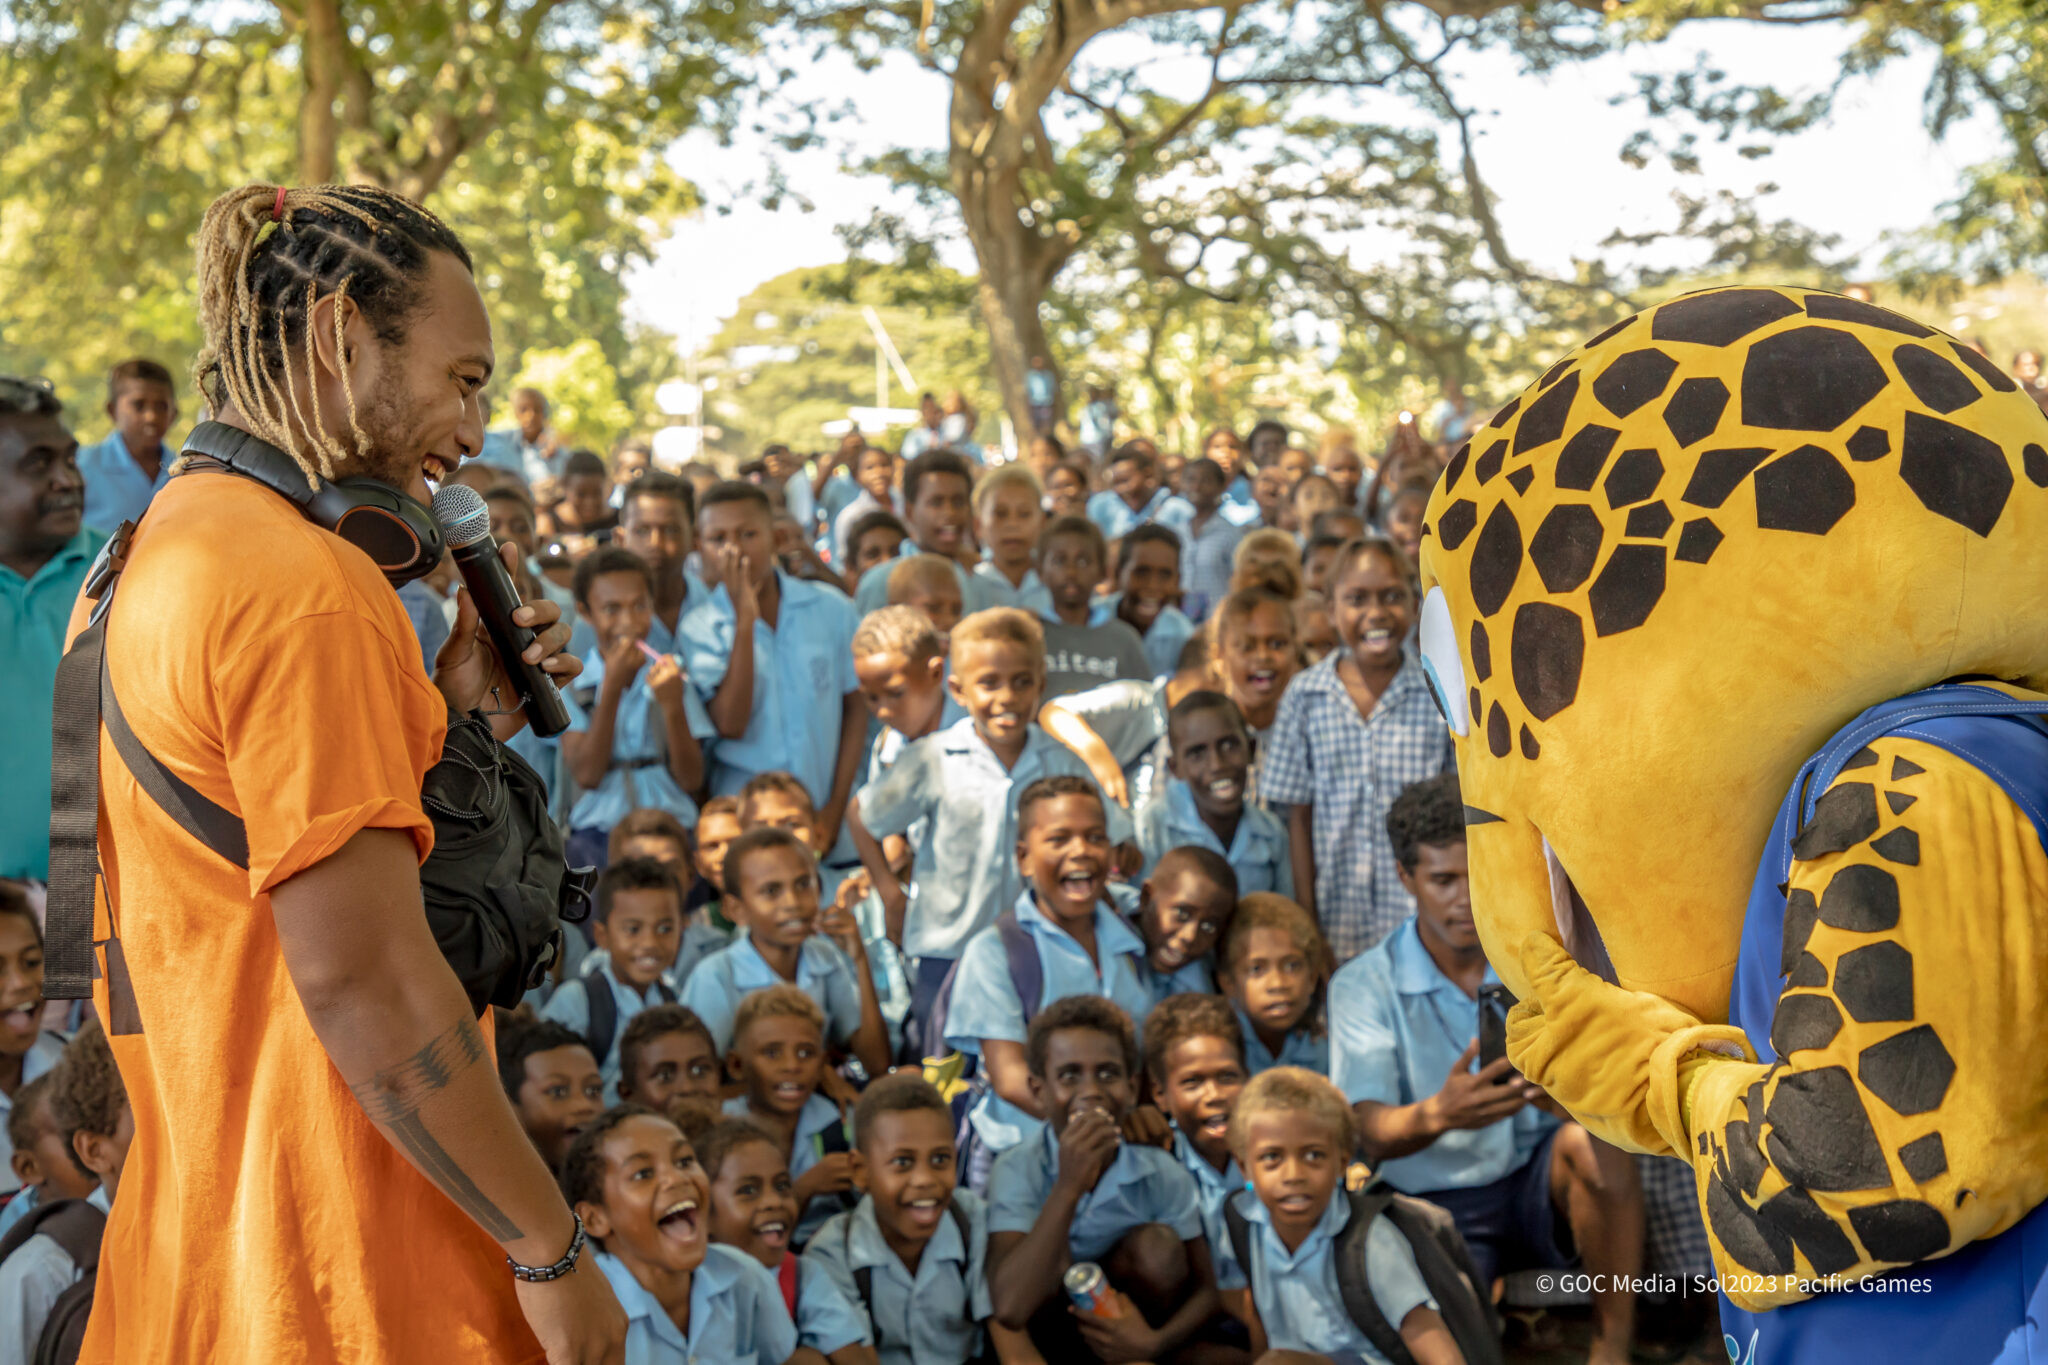 SOLO, the 2023 Pacific Games mascot, spreads the word about the volunteer programme during a school visit ©GOC
